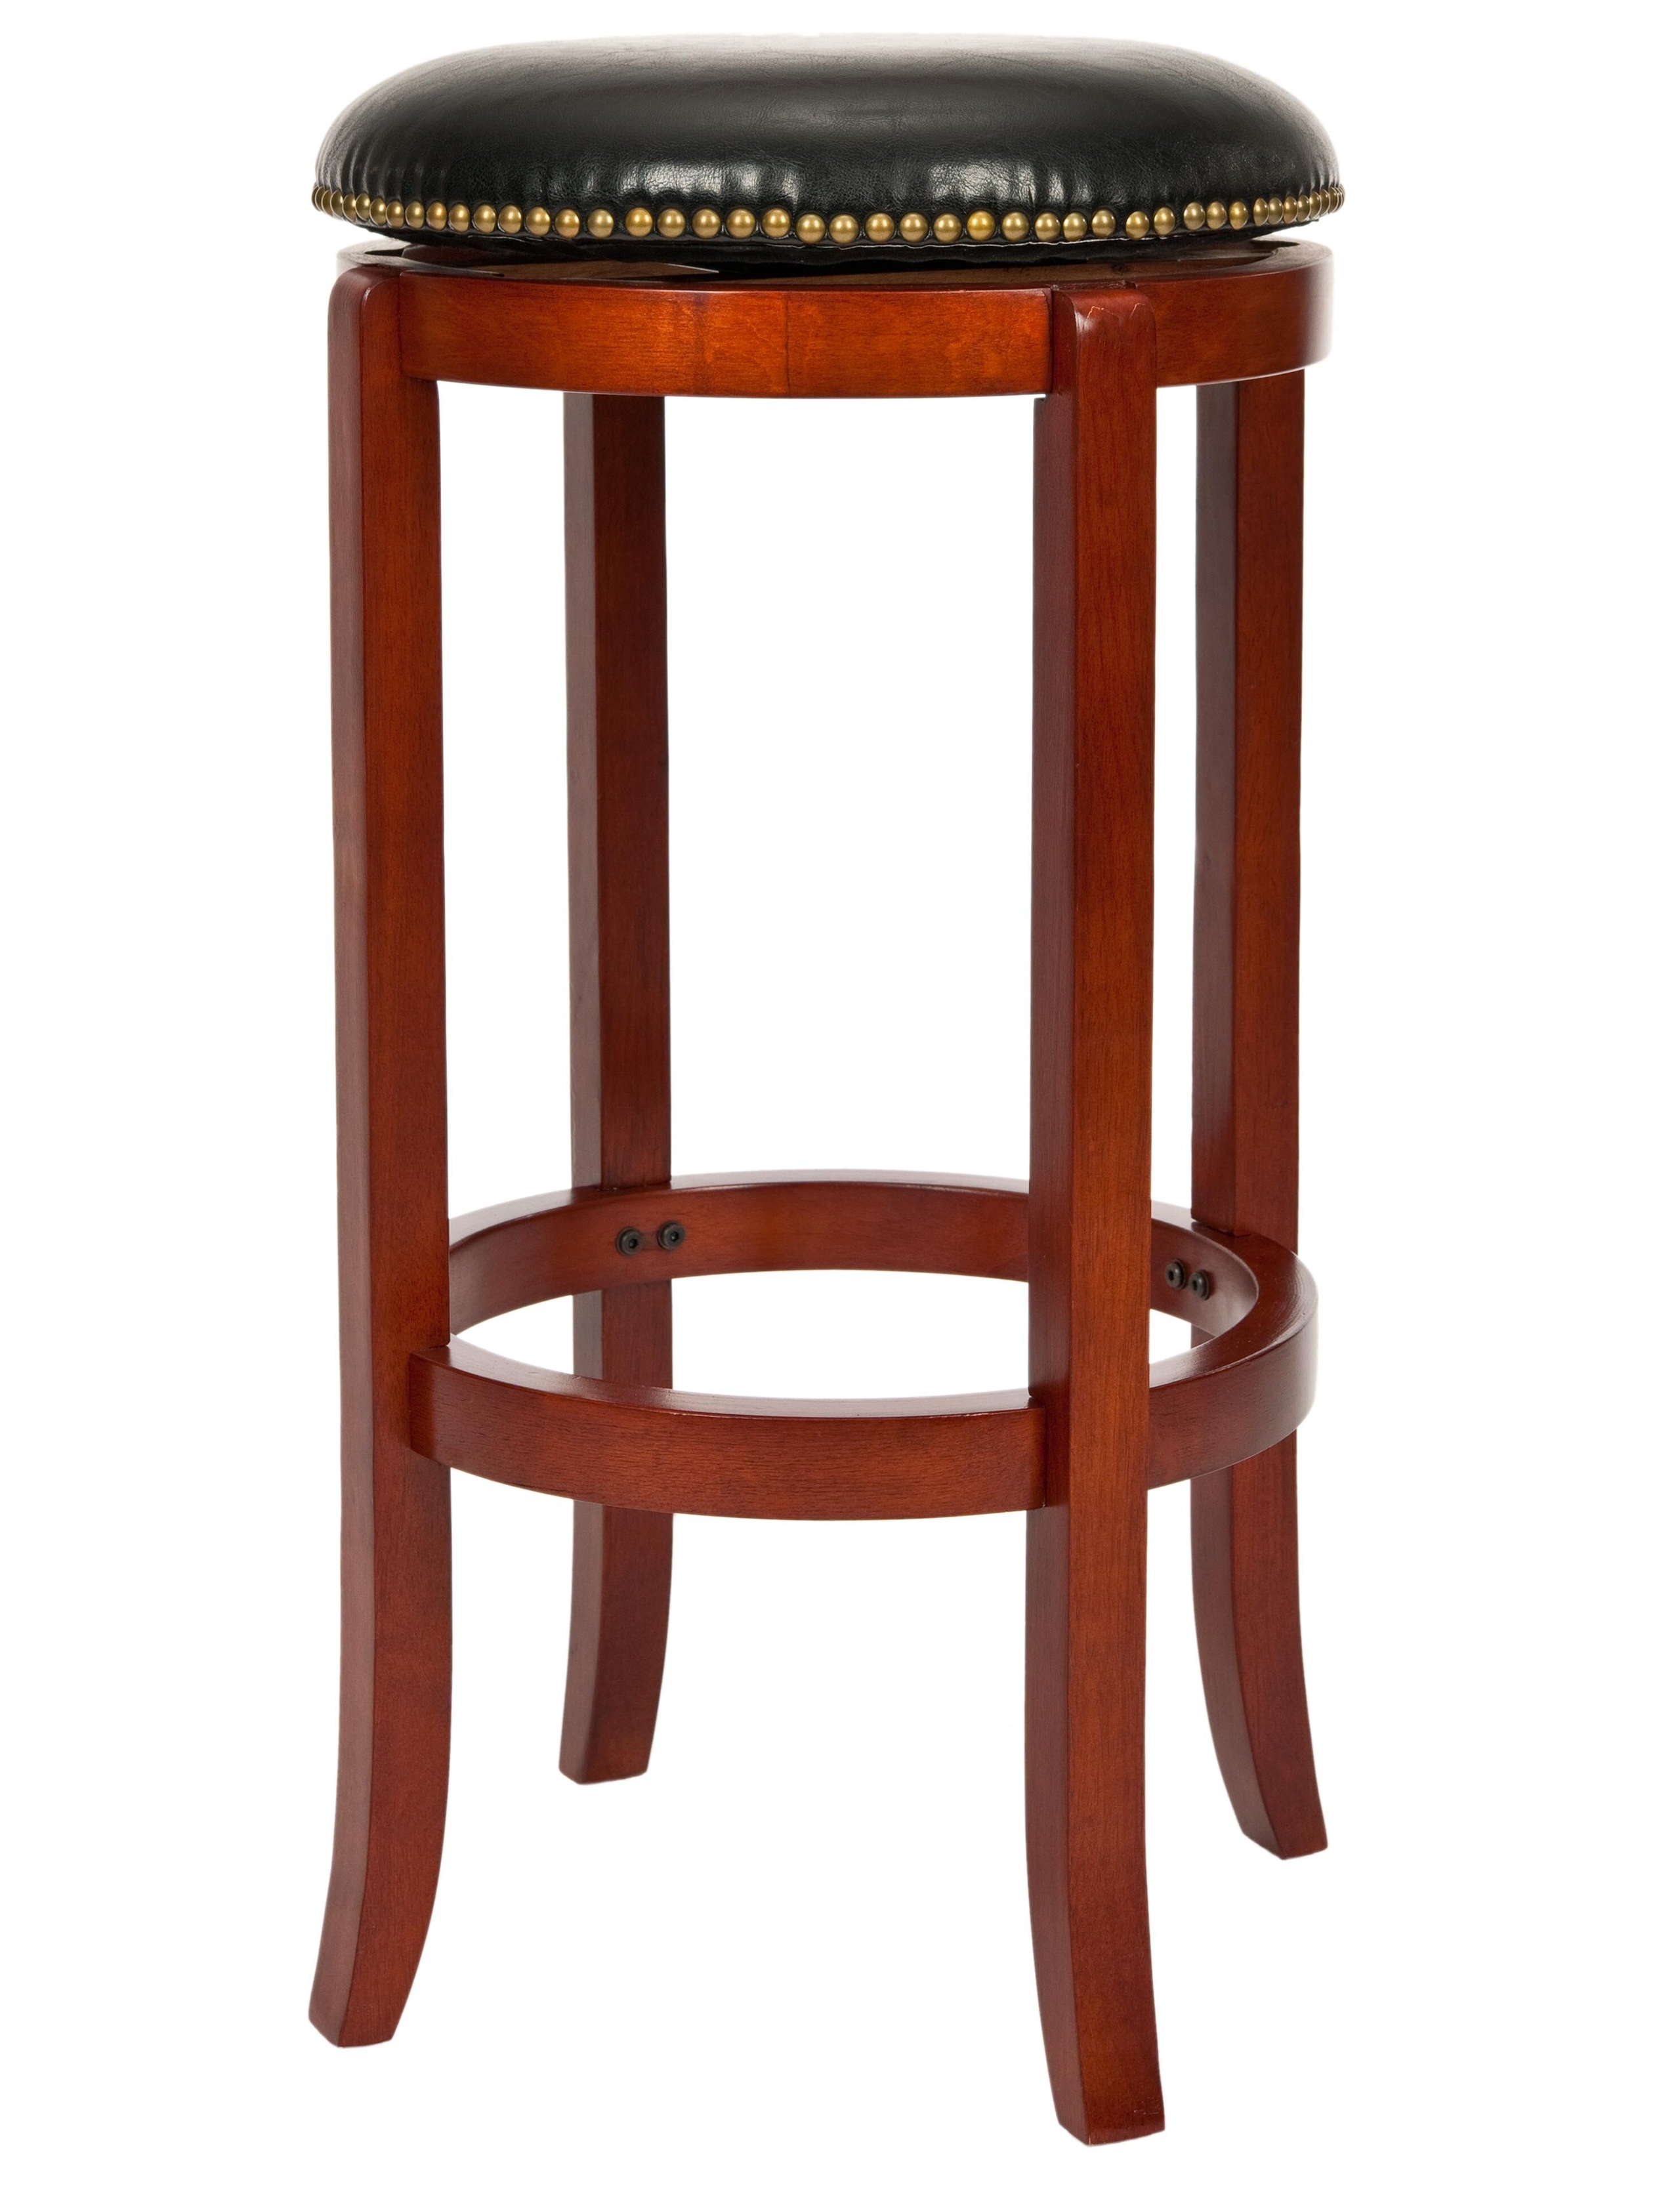 Safavieh Home Collection Thomas Light Cherry and Black Leather Nail Head Trim Backless Bar Stool